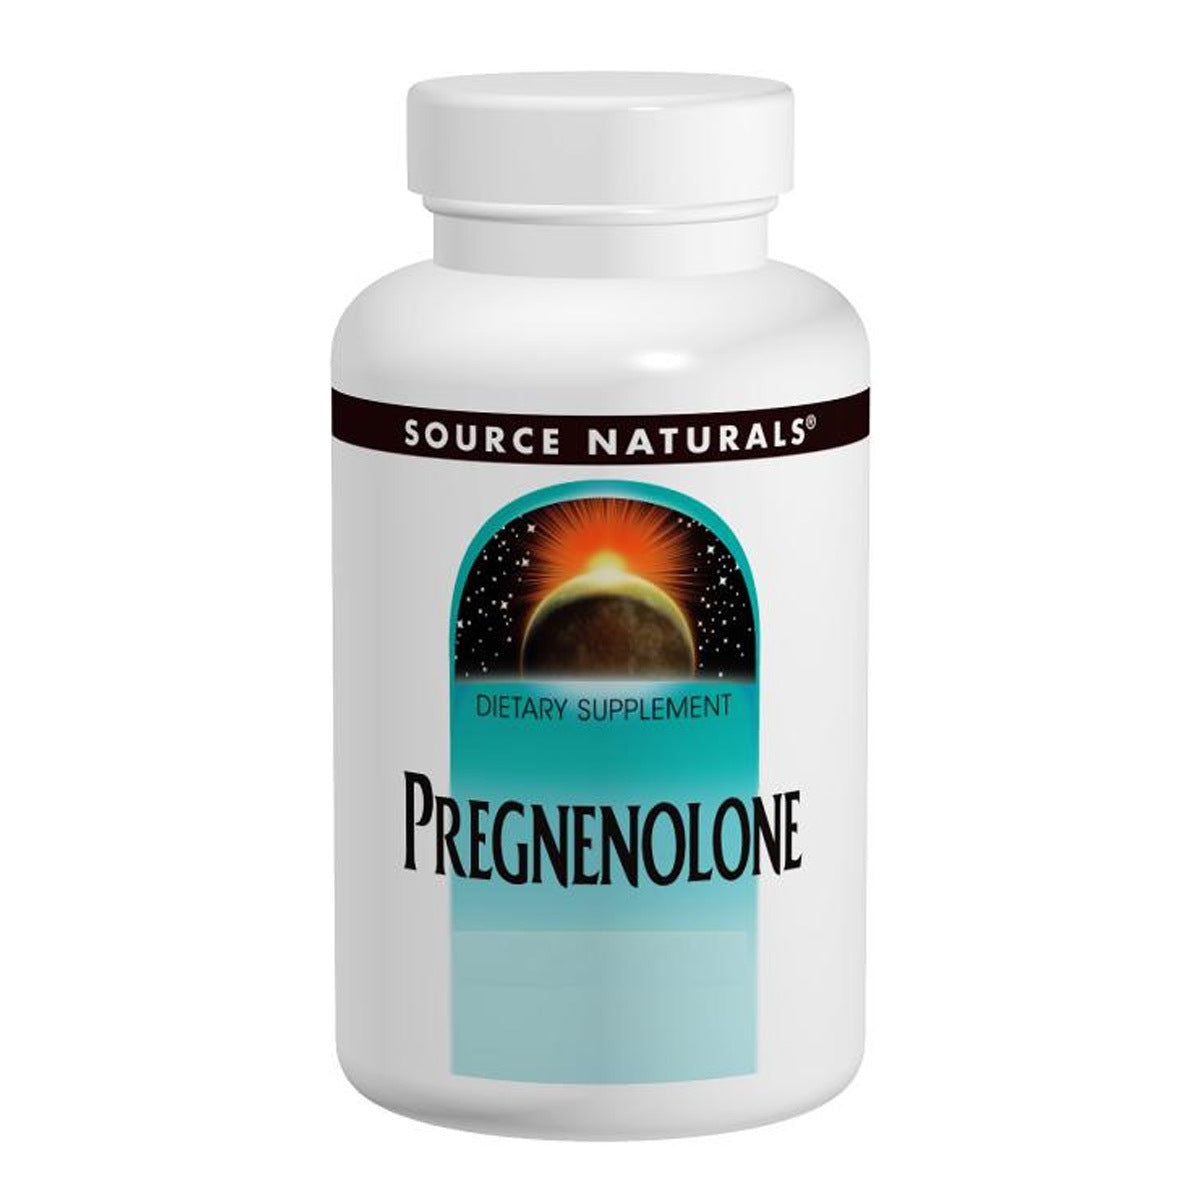 Primary image of Pregnenolone 50mg